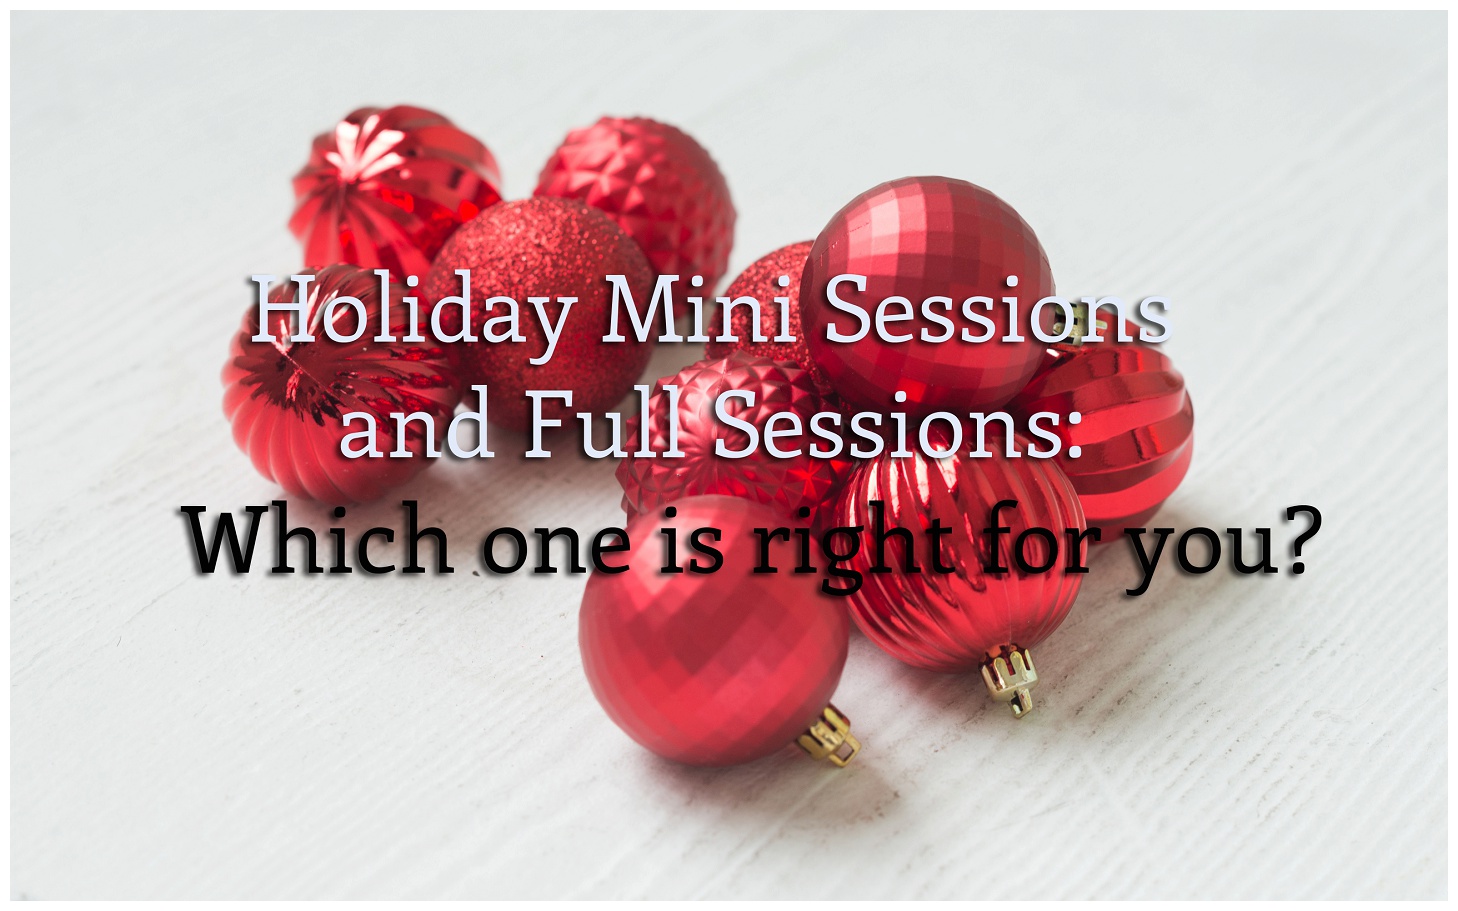 Holiday Minis Vs Full Sessions